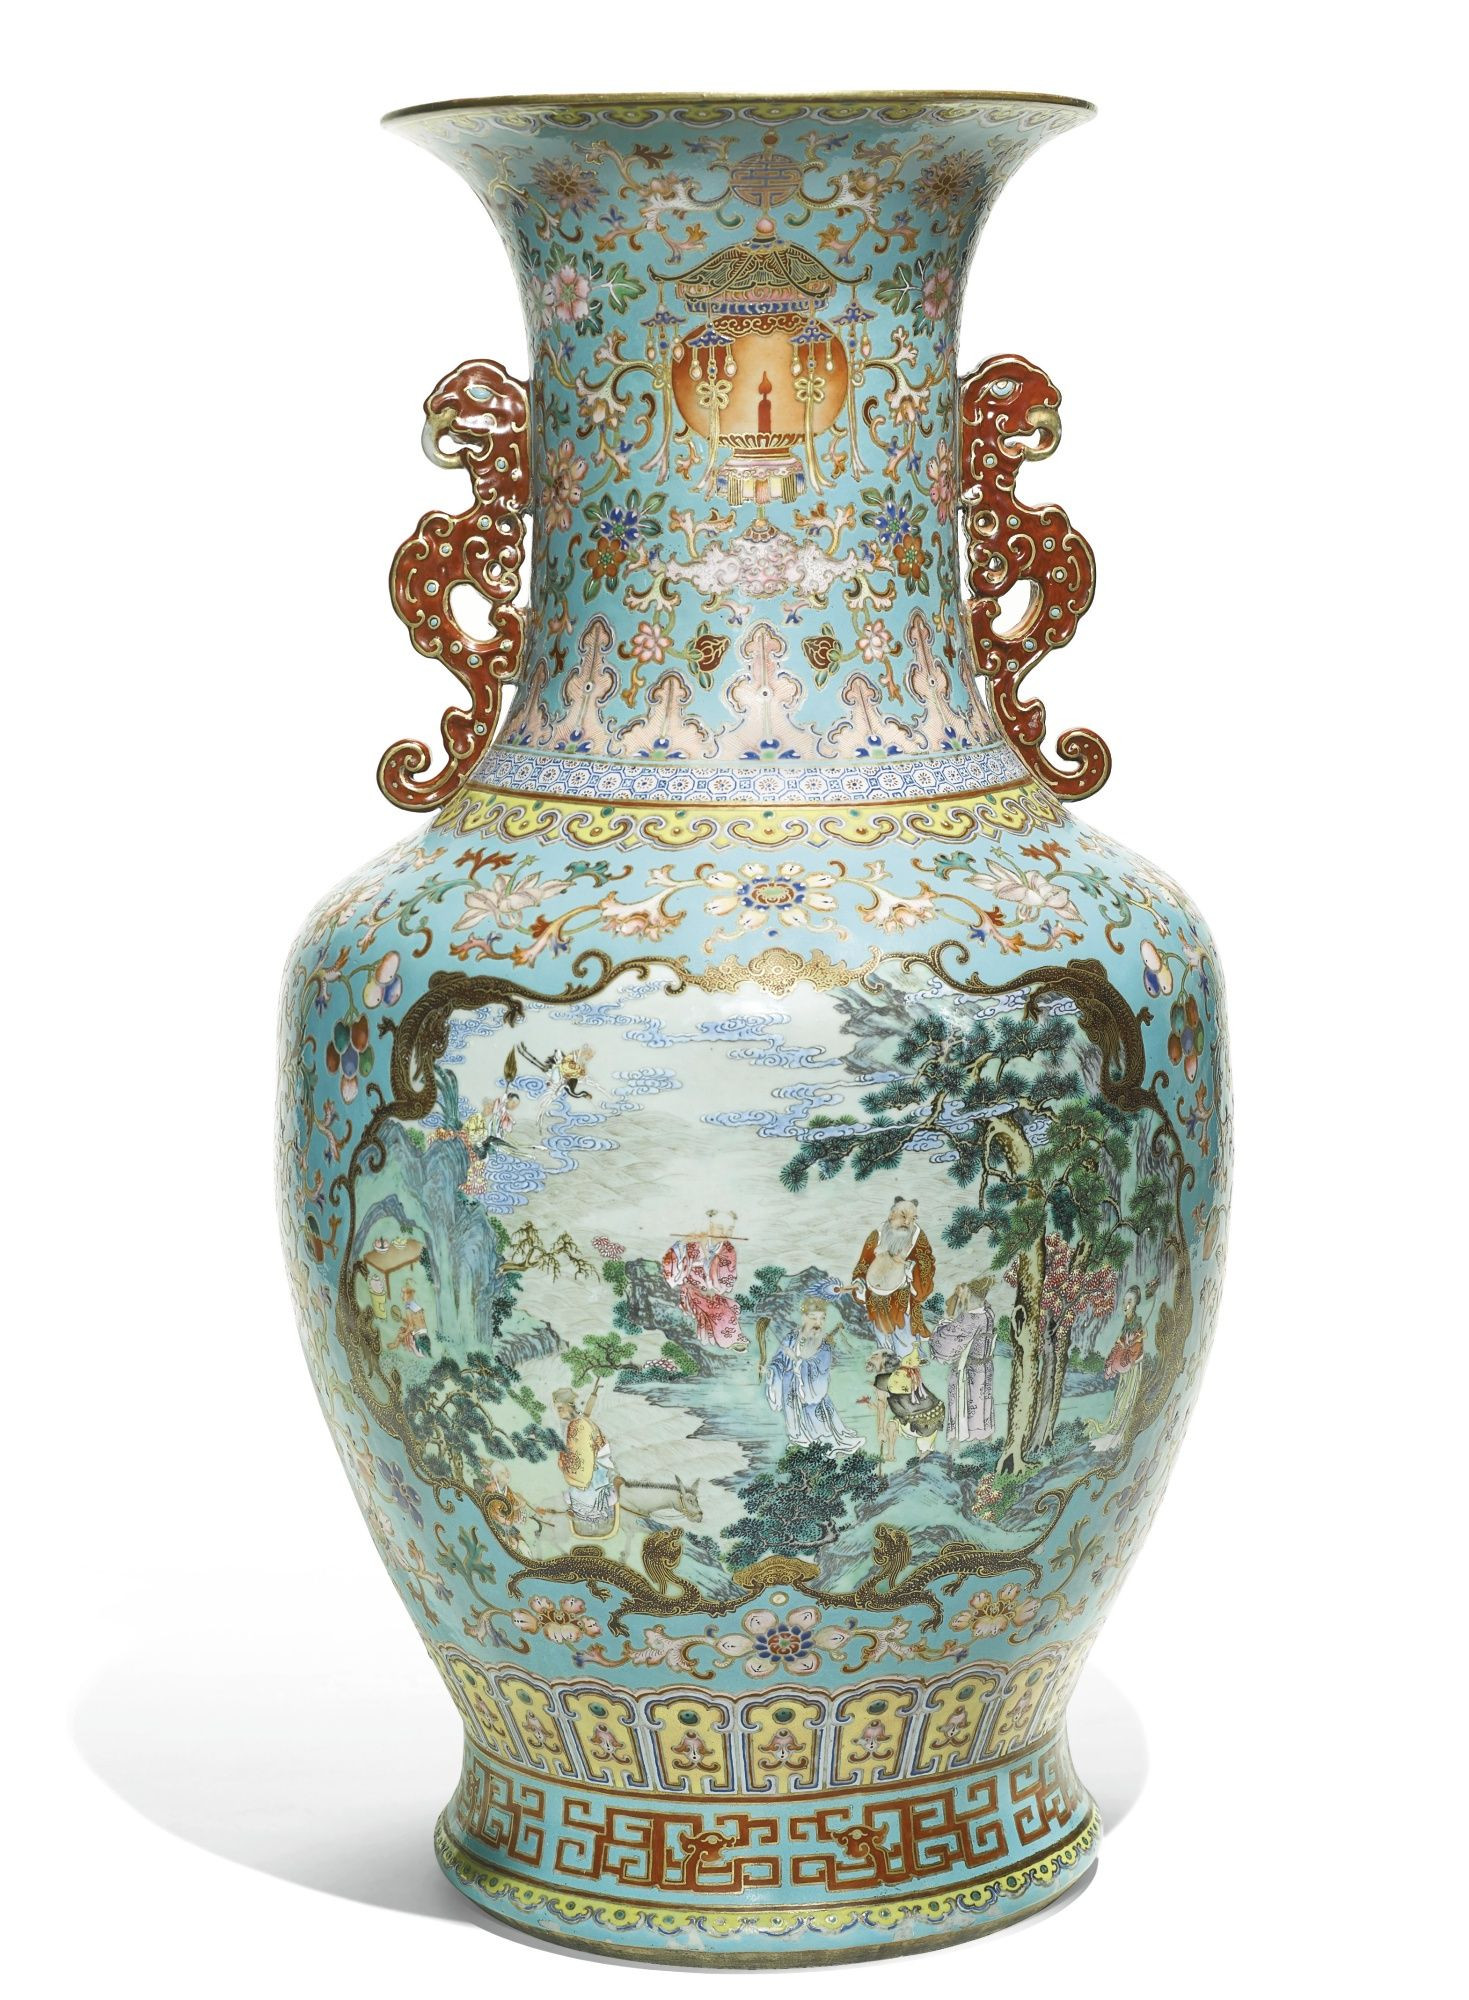 rose medallion vase of a large and finely enamelled famille rose immortals vase qing for a large and finely enamelled famille rose immortals vase qing dynasty 18th century sothebys finely enamelled to the front and back with a large